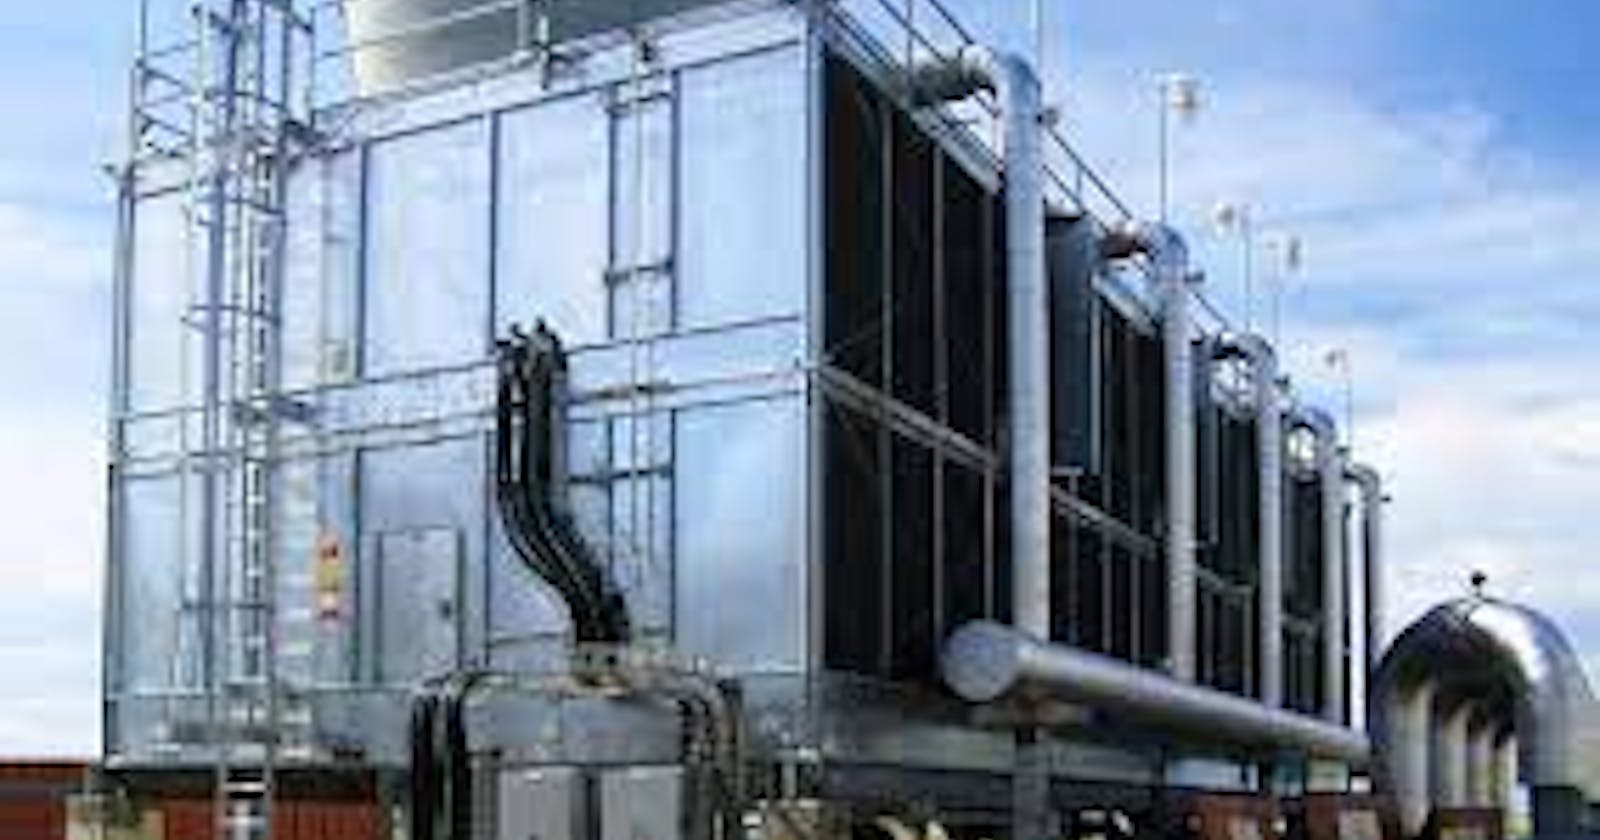 Global Cooling Towers Market Size is Expected to Reach USD 3.72 Billion, at a CAGR of 2.7% by 2022 to 2028 | In-depth Report